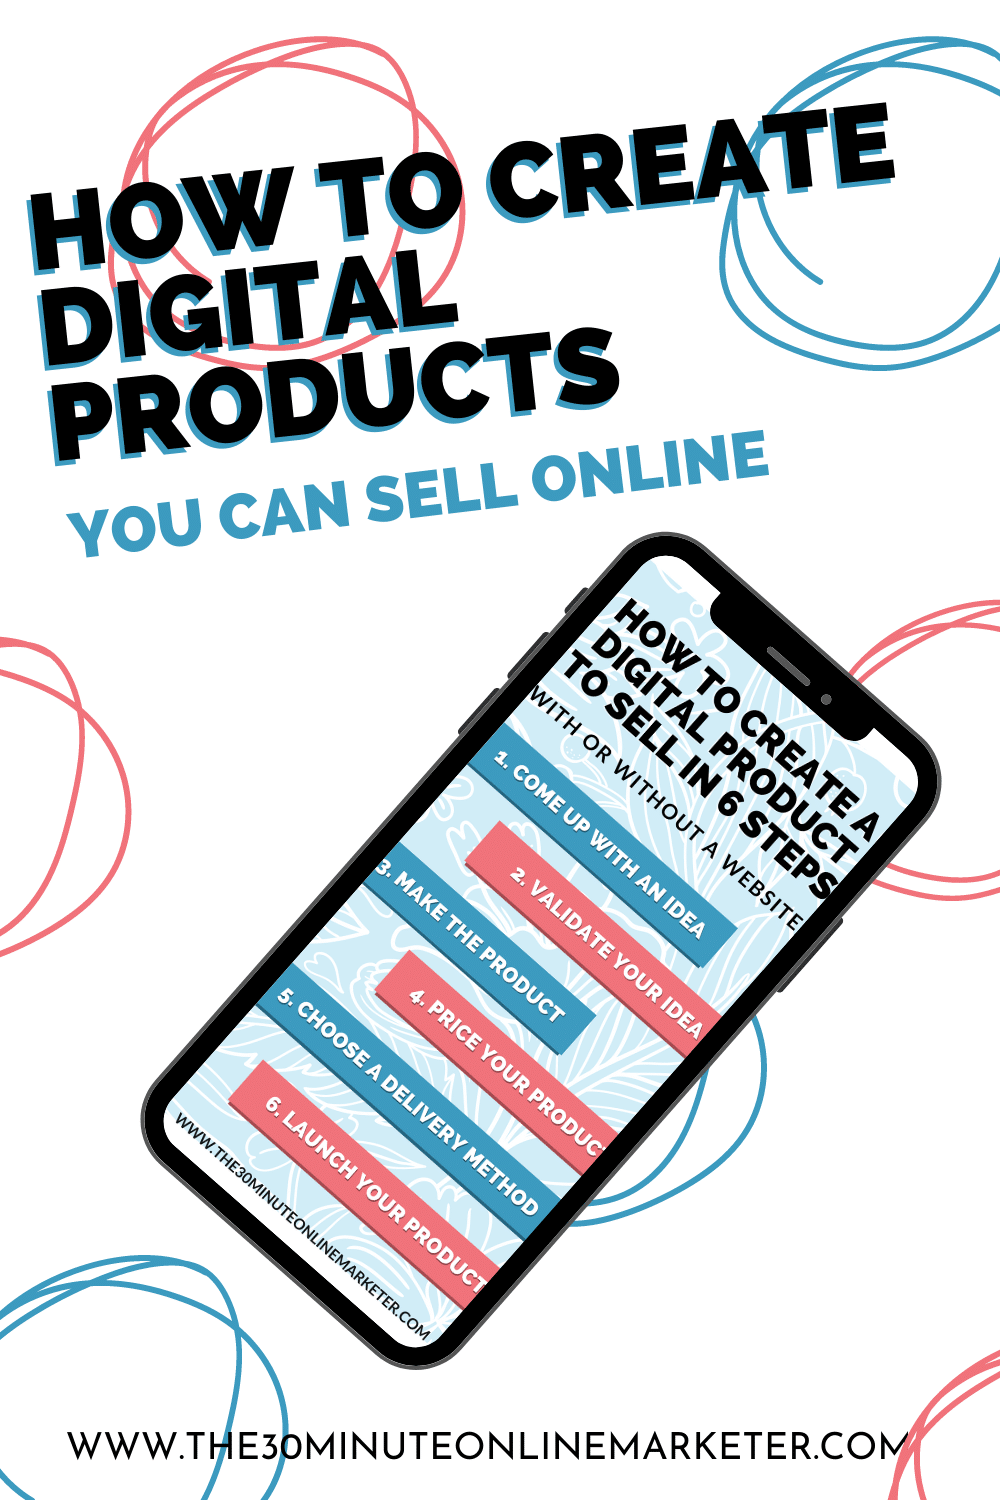 Create Digital Products to Sell Online